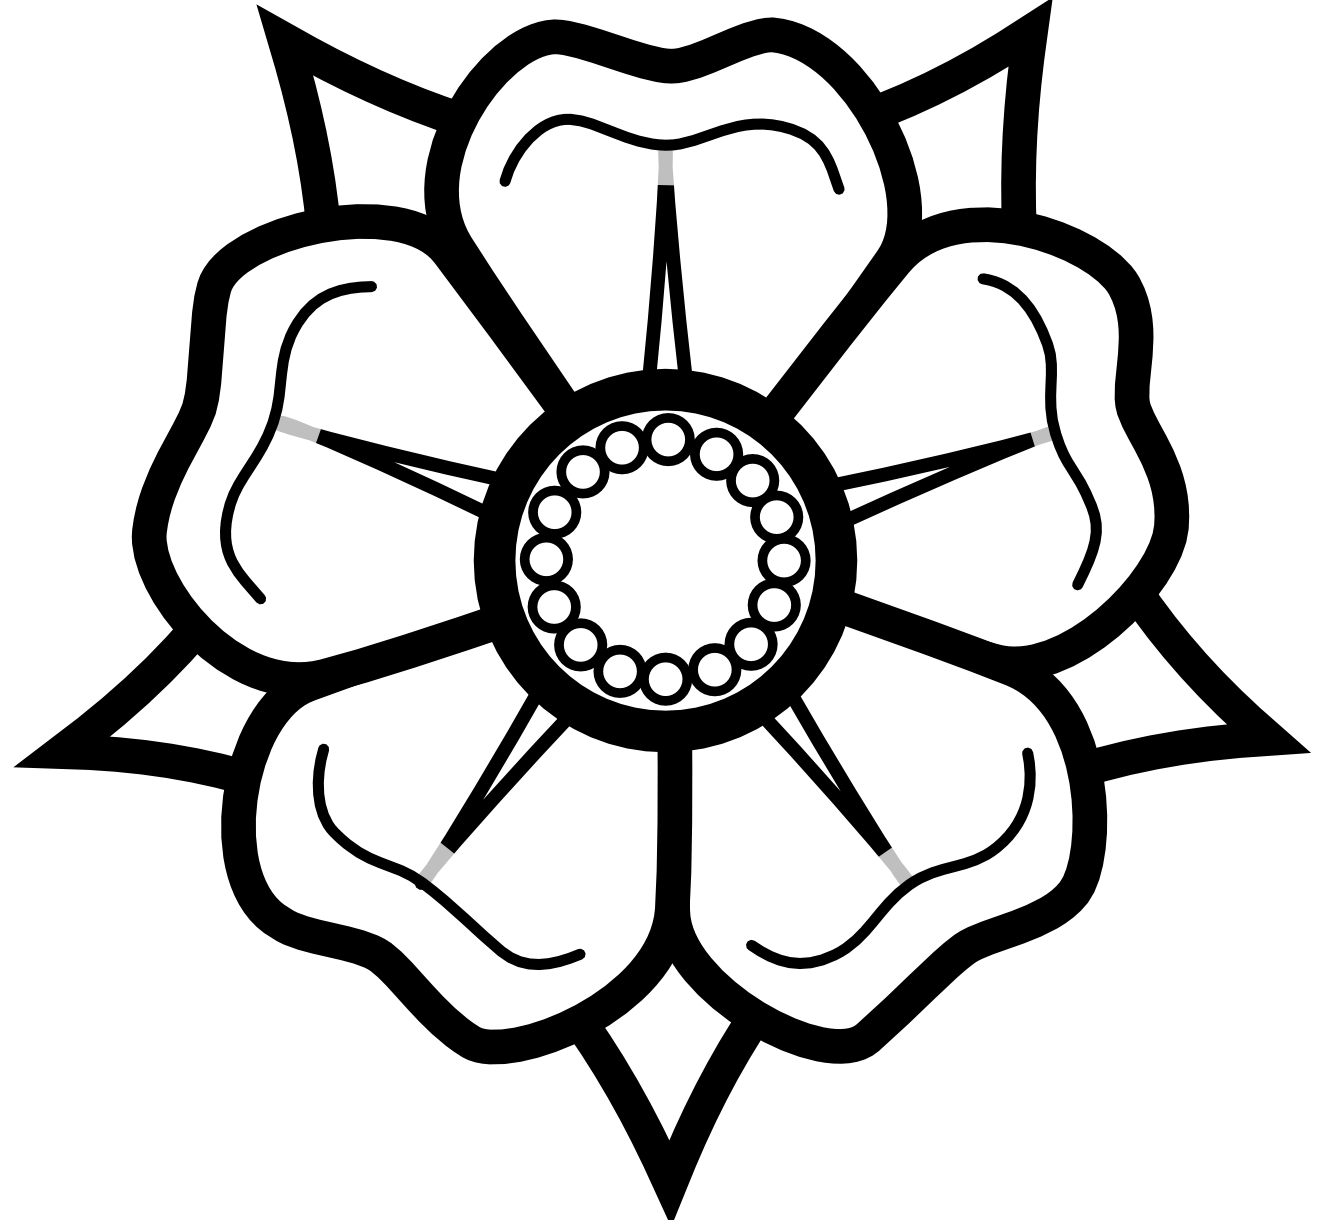 Black and White Rose Logo - Free Drawings Of Flowers In Black And White, Download Free Clip Art ...